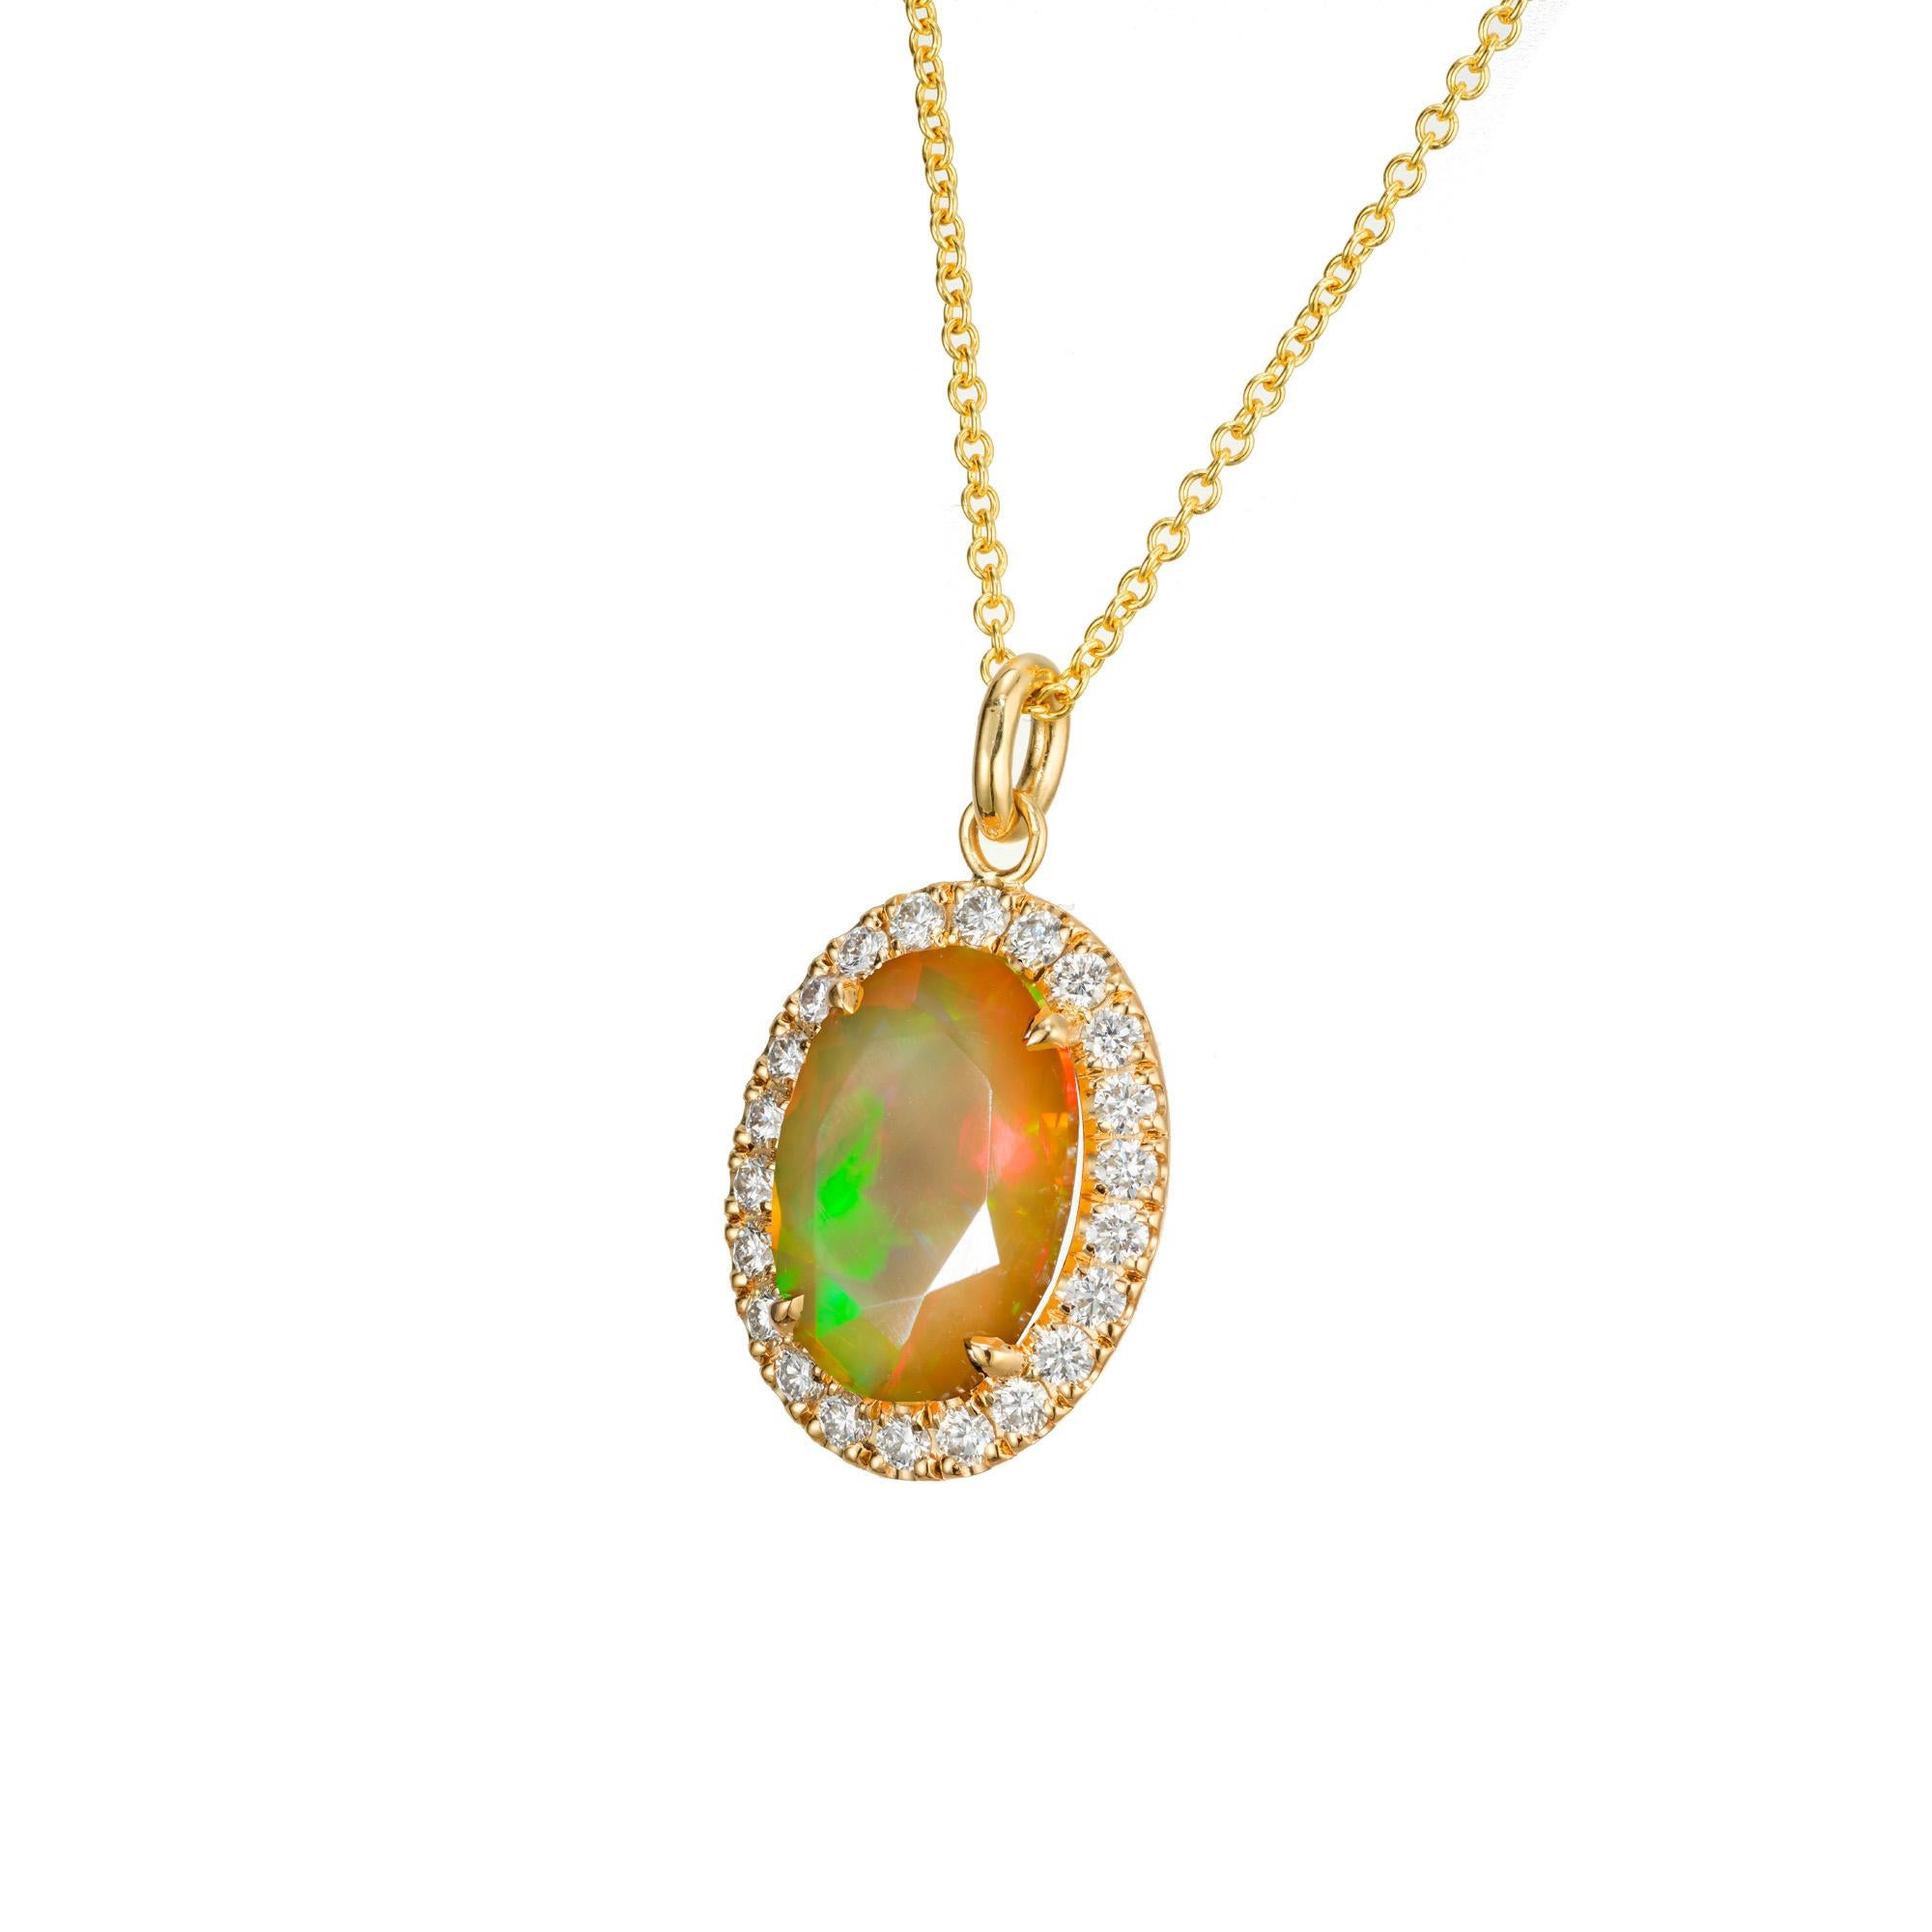 Oval faceted reddish, green, orange opal and diamond pendant. 3.50ct Oval opal with a halo of  22 round brilliant cut diamonds. 18k yellow gold setting and 18 inch chain. The pendant was designed and crafted in the Peter Suchy workshop.

1 oval